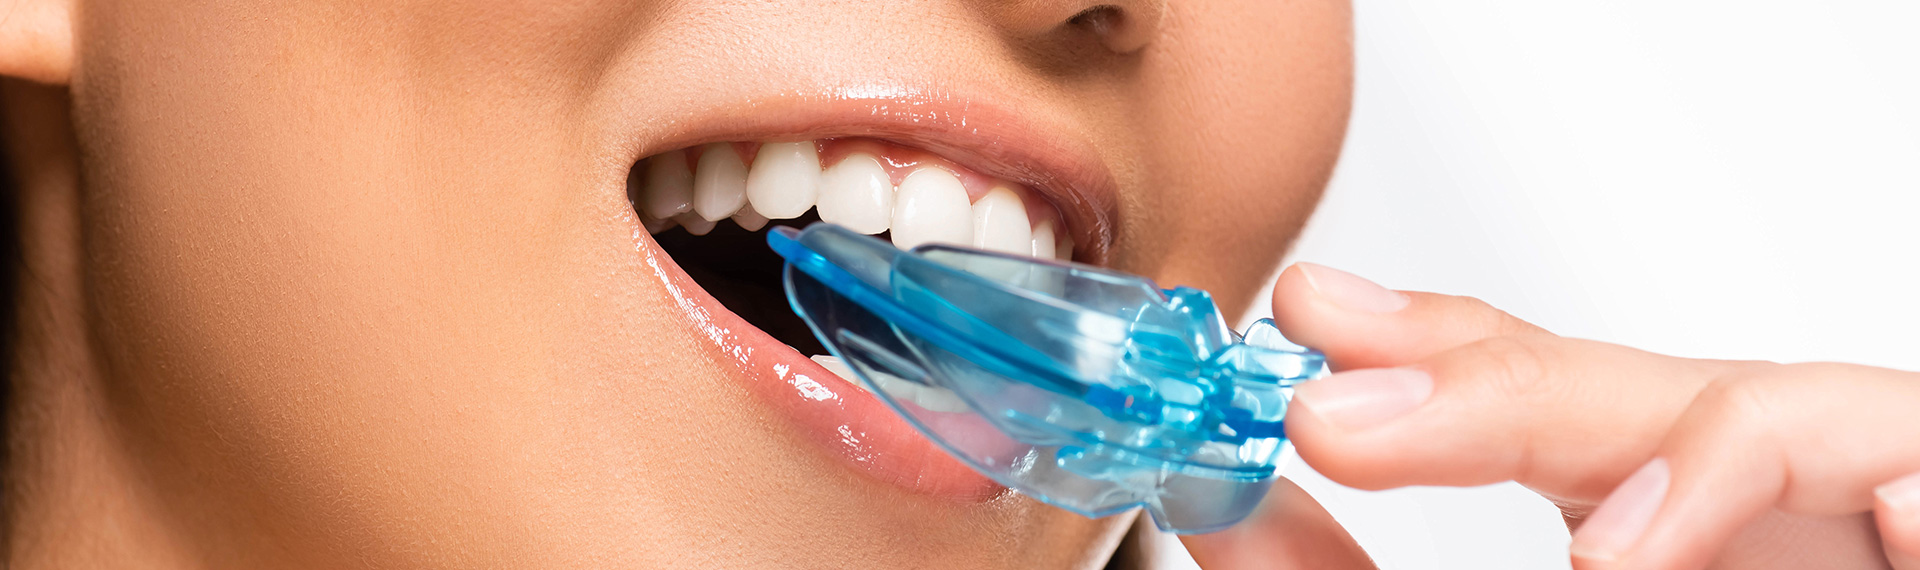 Learn More About Dental Mouth Guards Near Me In, Hamilton Ontario Area